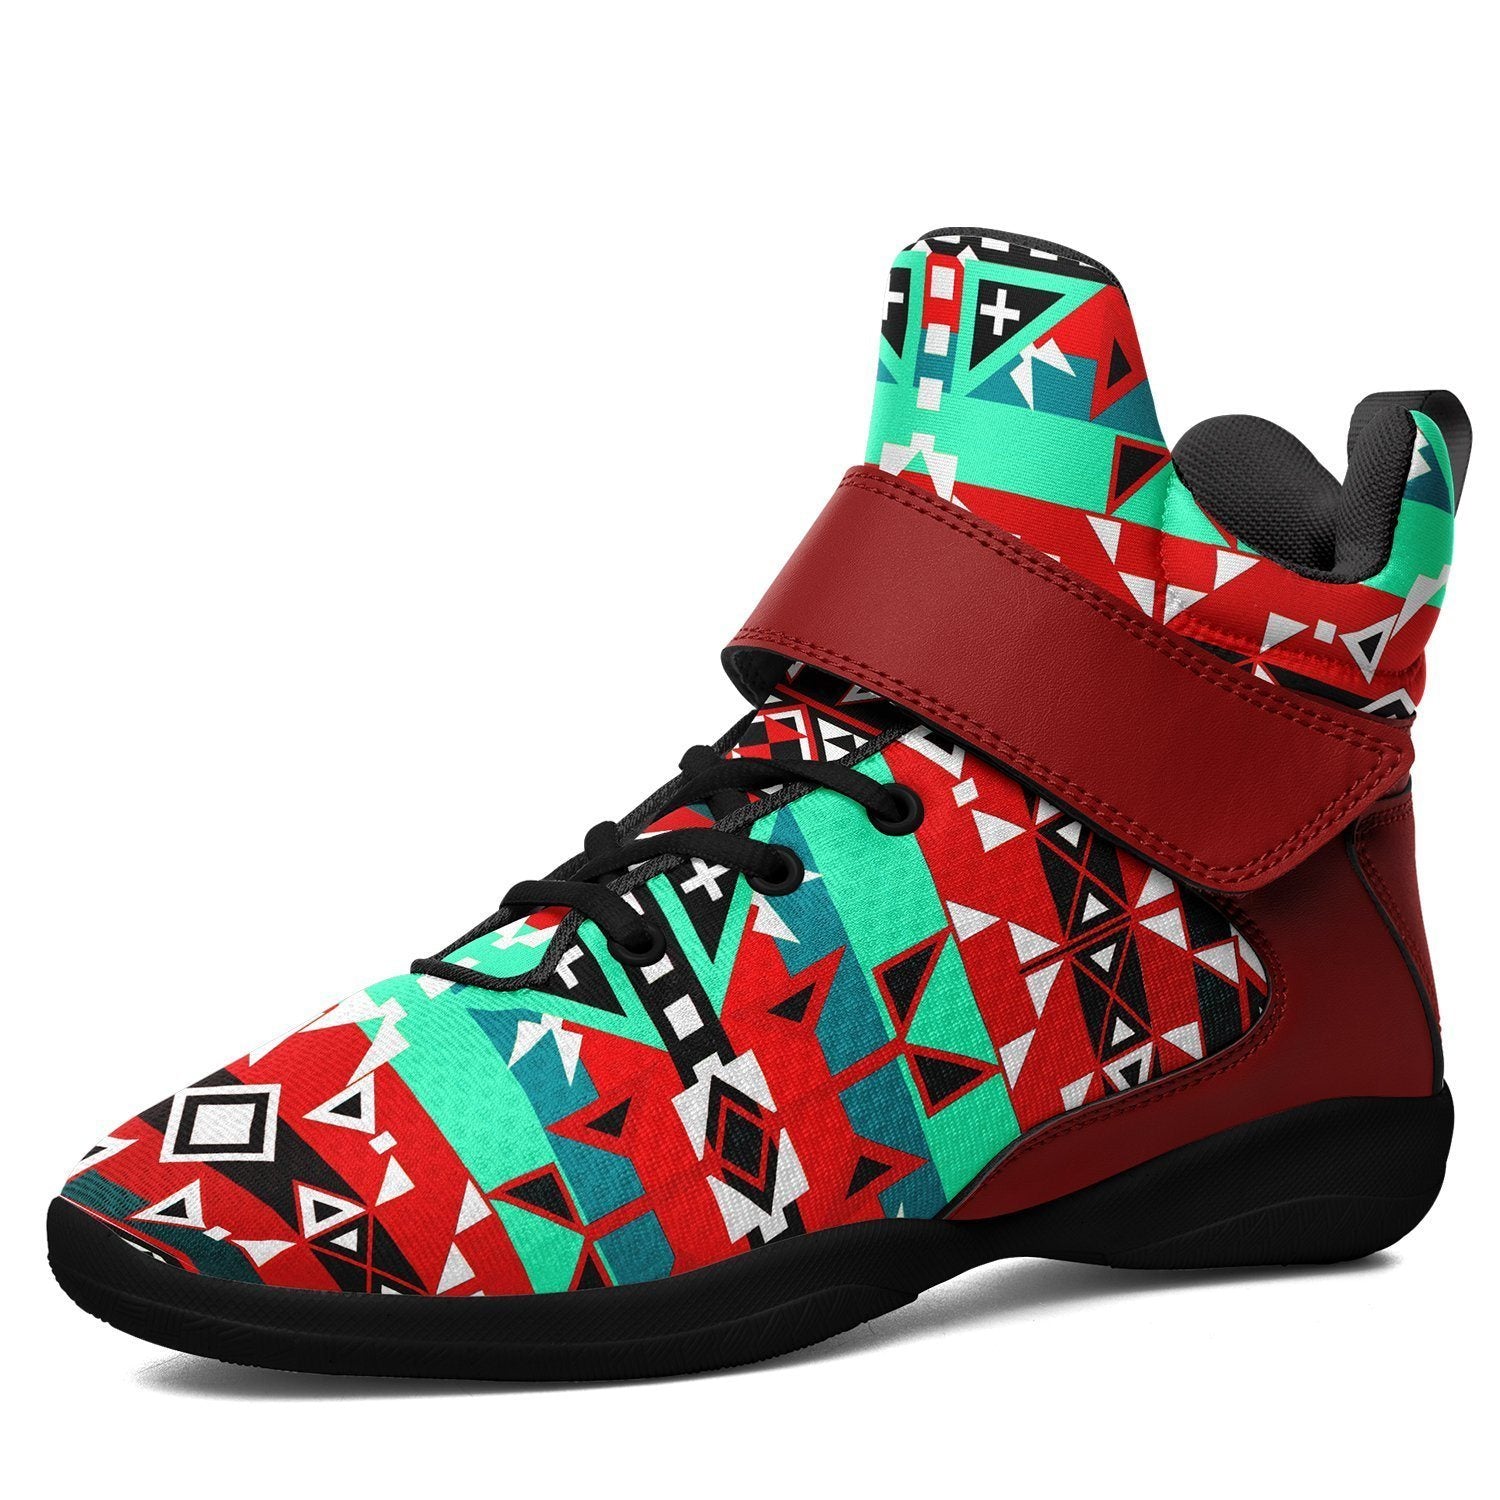 After the Southwest Rain Ipottaa Basketball / Sport High Top Shoes - Black Sole 49 Dzine US Men 7 / EUR 40 Black Sole with Dark Red Strap 